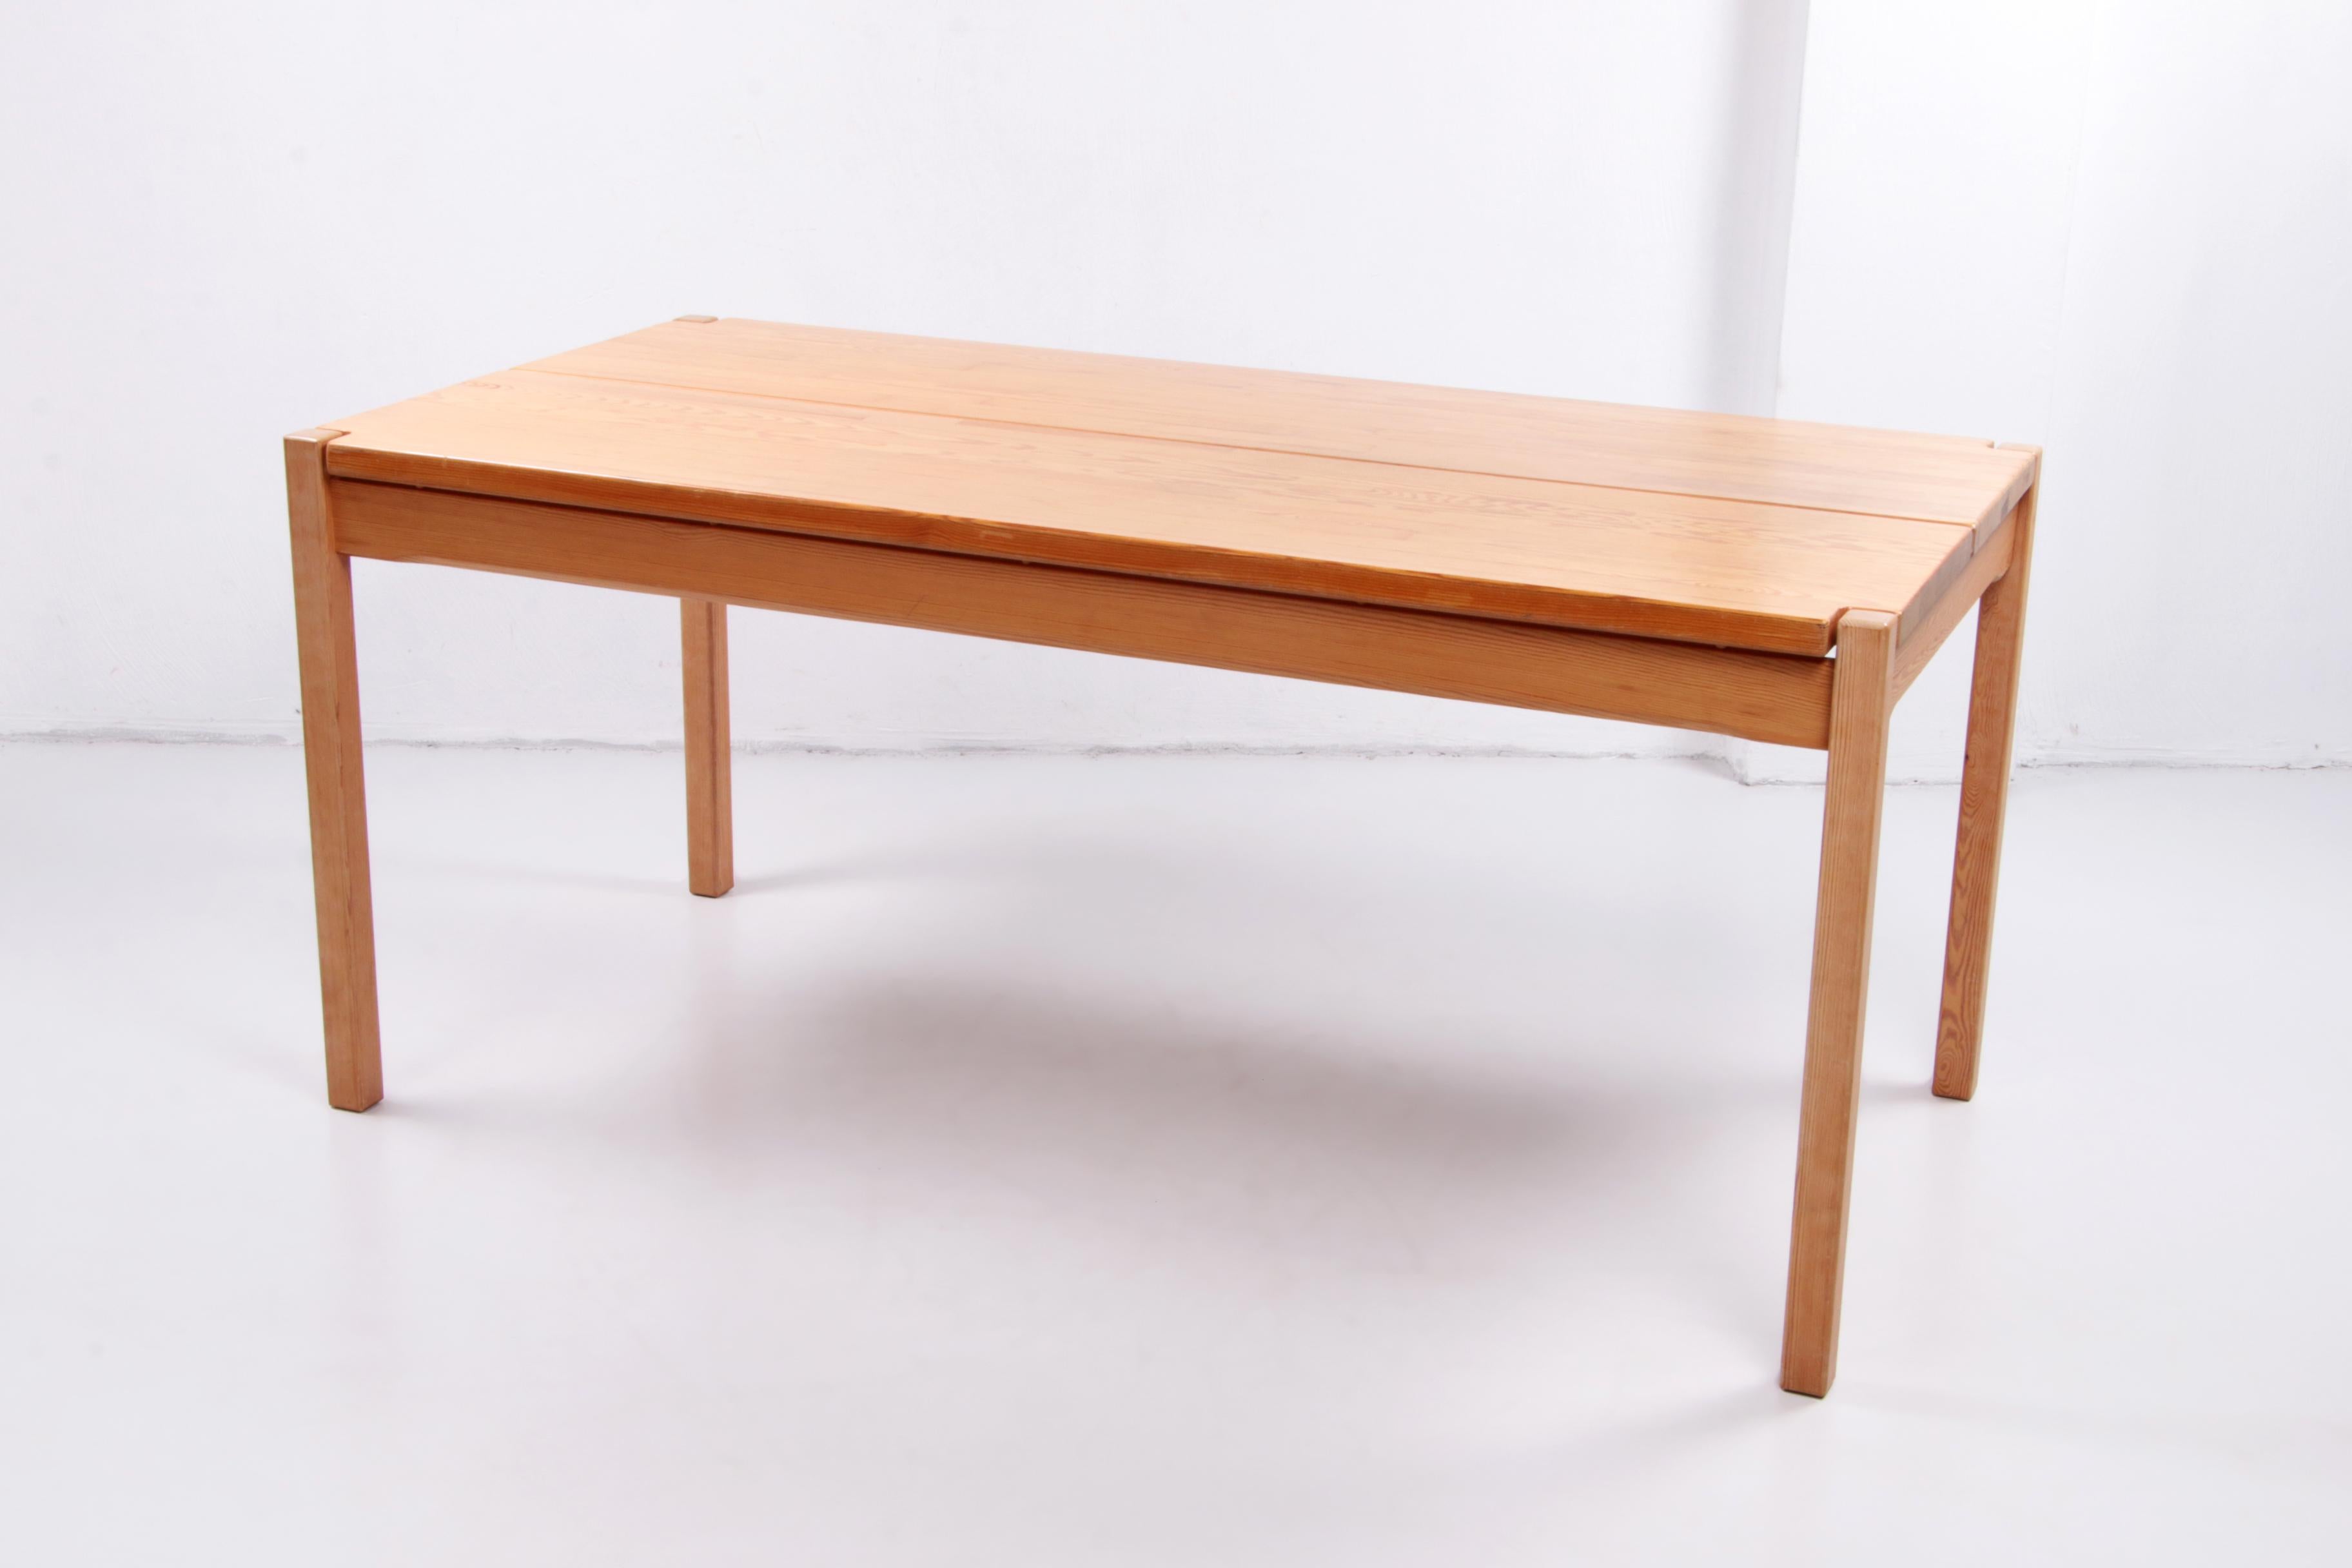 Mid-20th Century Ilmari Tapiovaara Dining Table with 4 Chairs for Laukaan Pu, 1963 For Sale